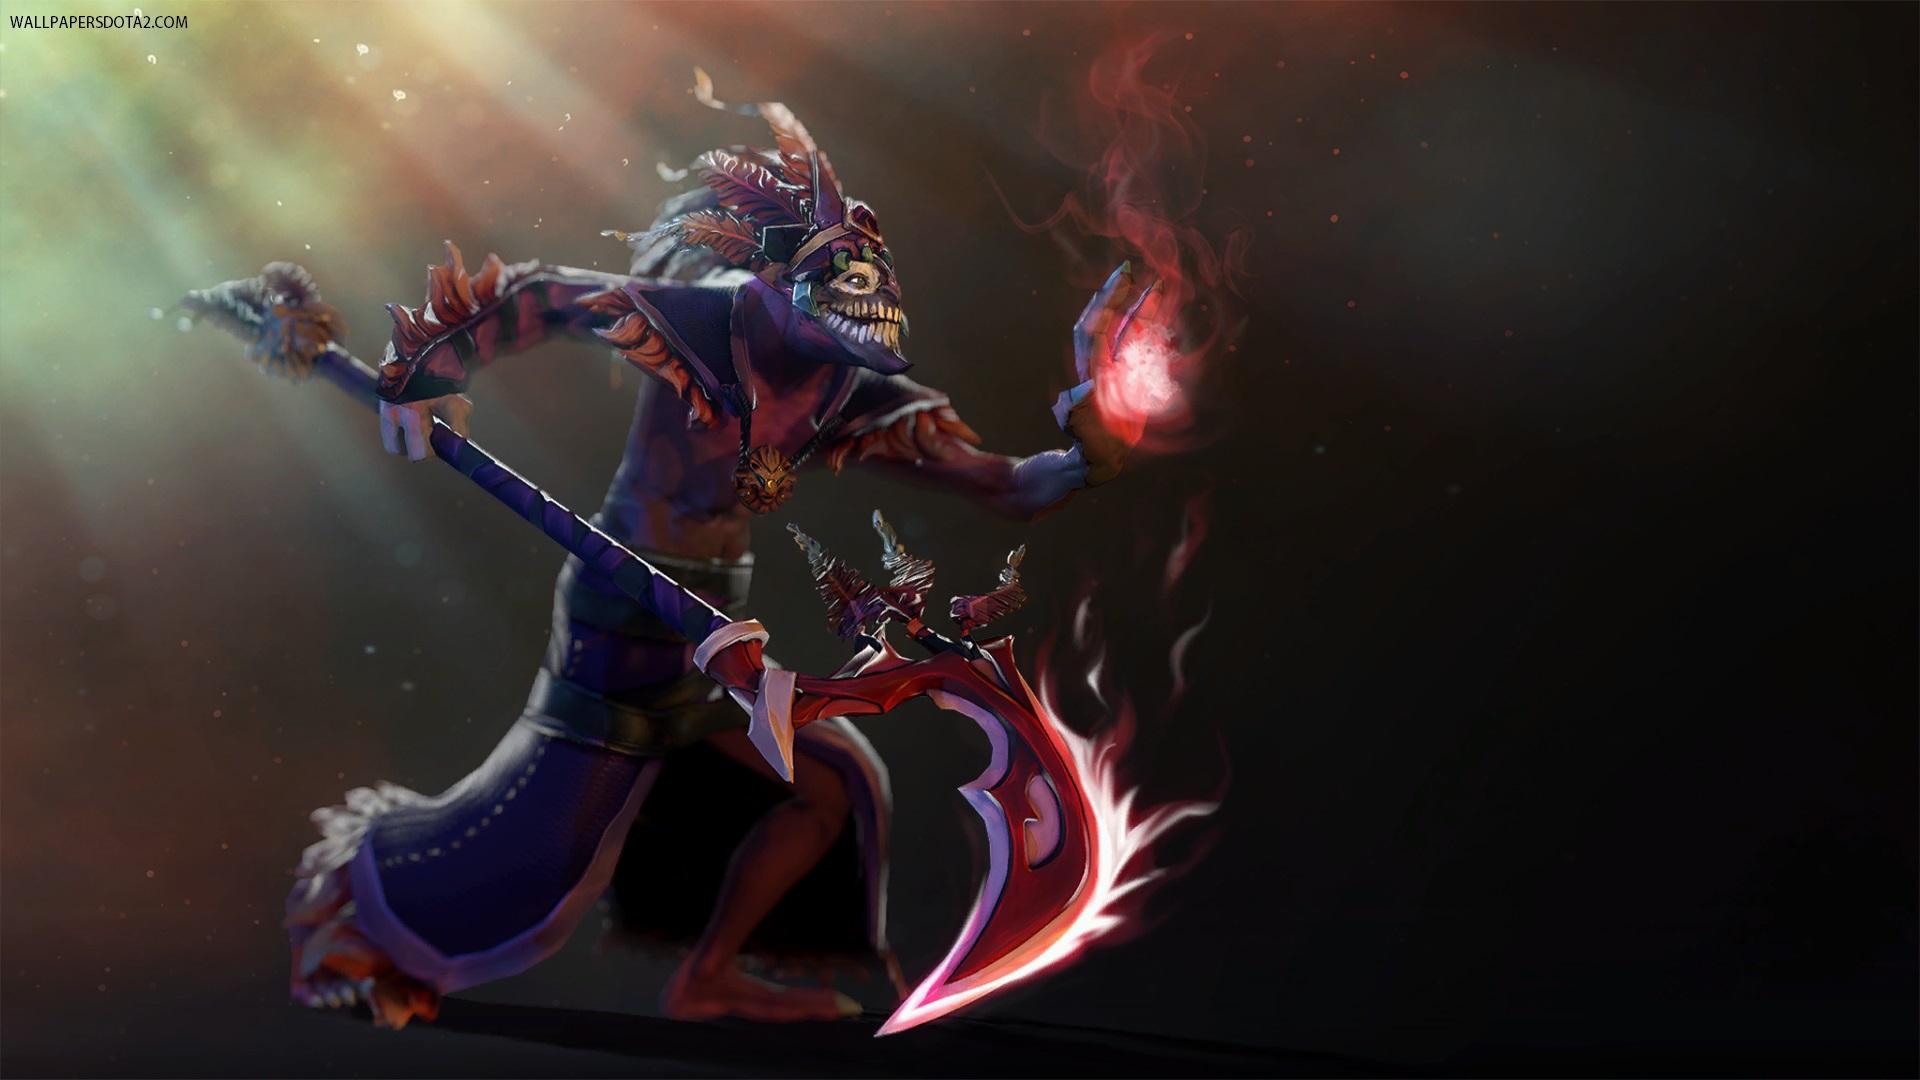 Dazzle Shadow Flame Background For Laptops Dota Wallpaper